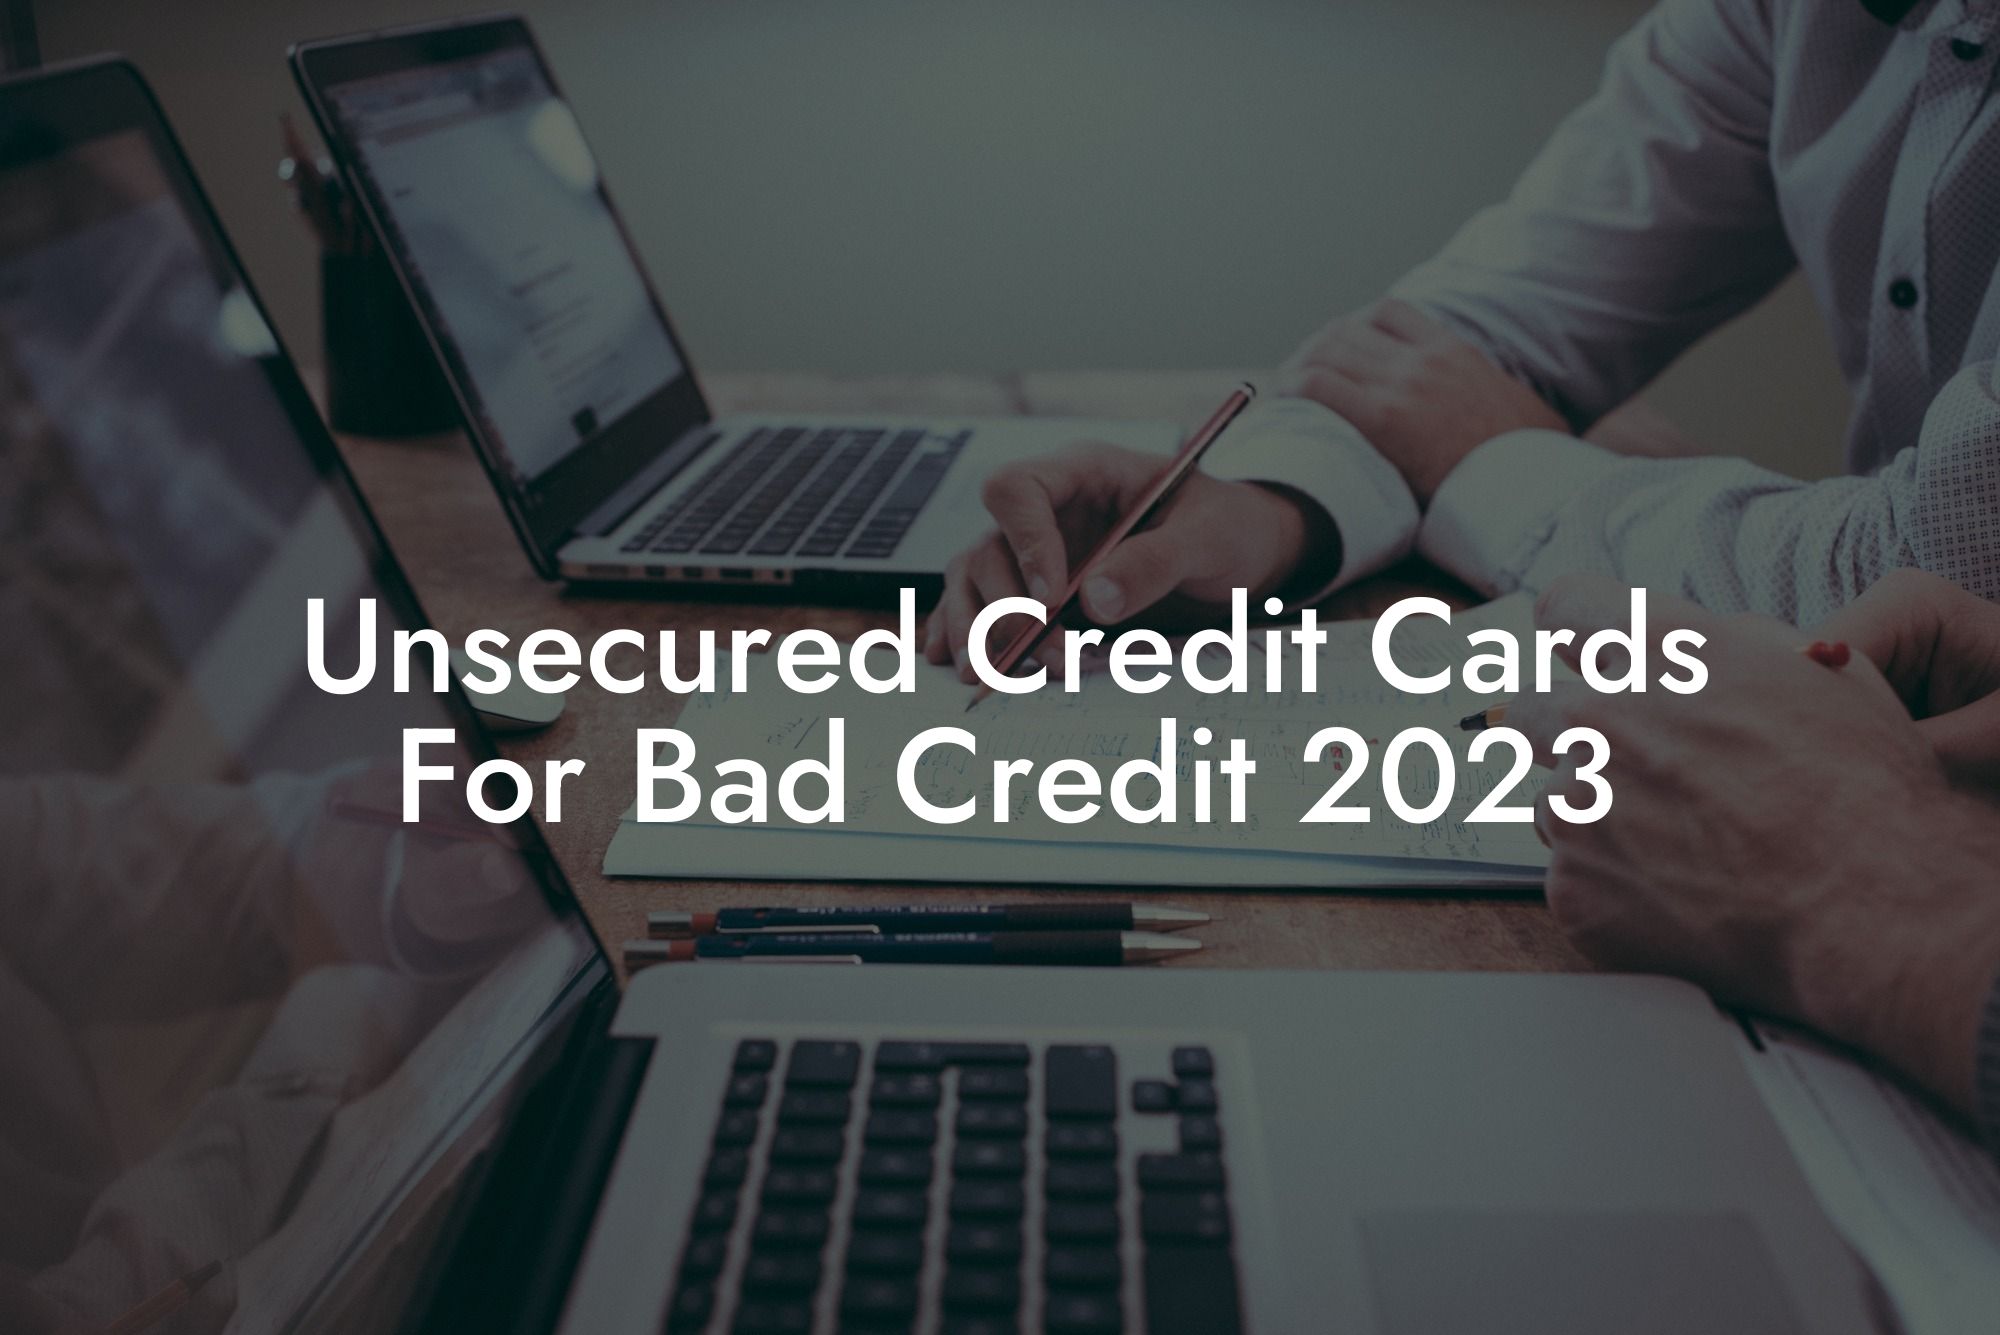 Unsecured Credit Cards For Bad Credit 2023